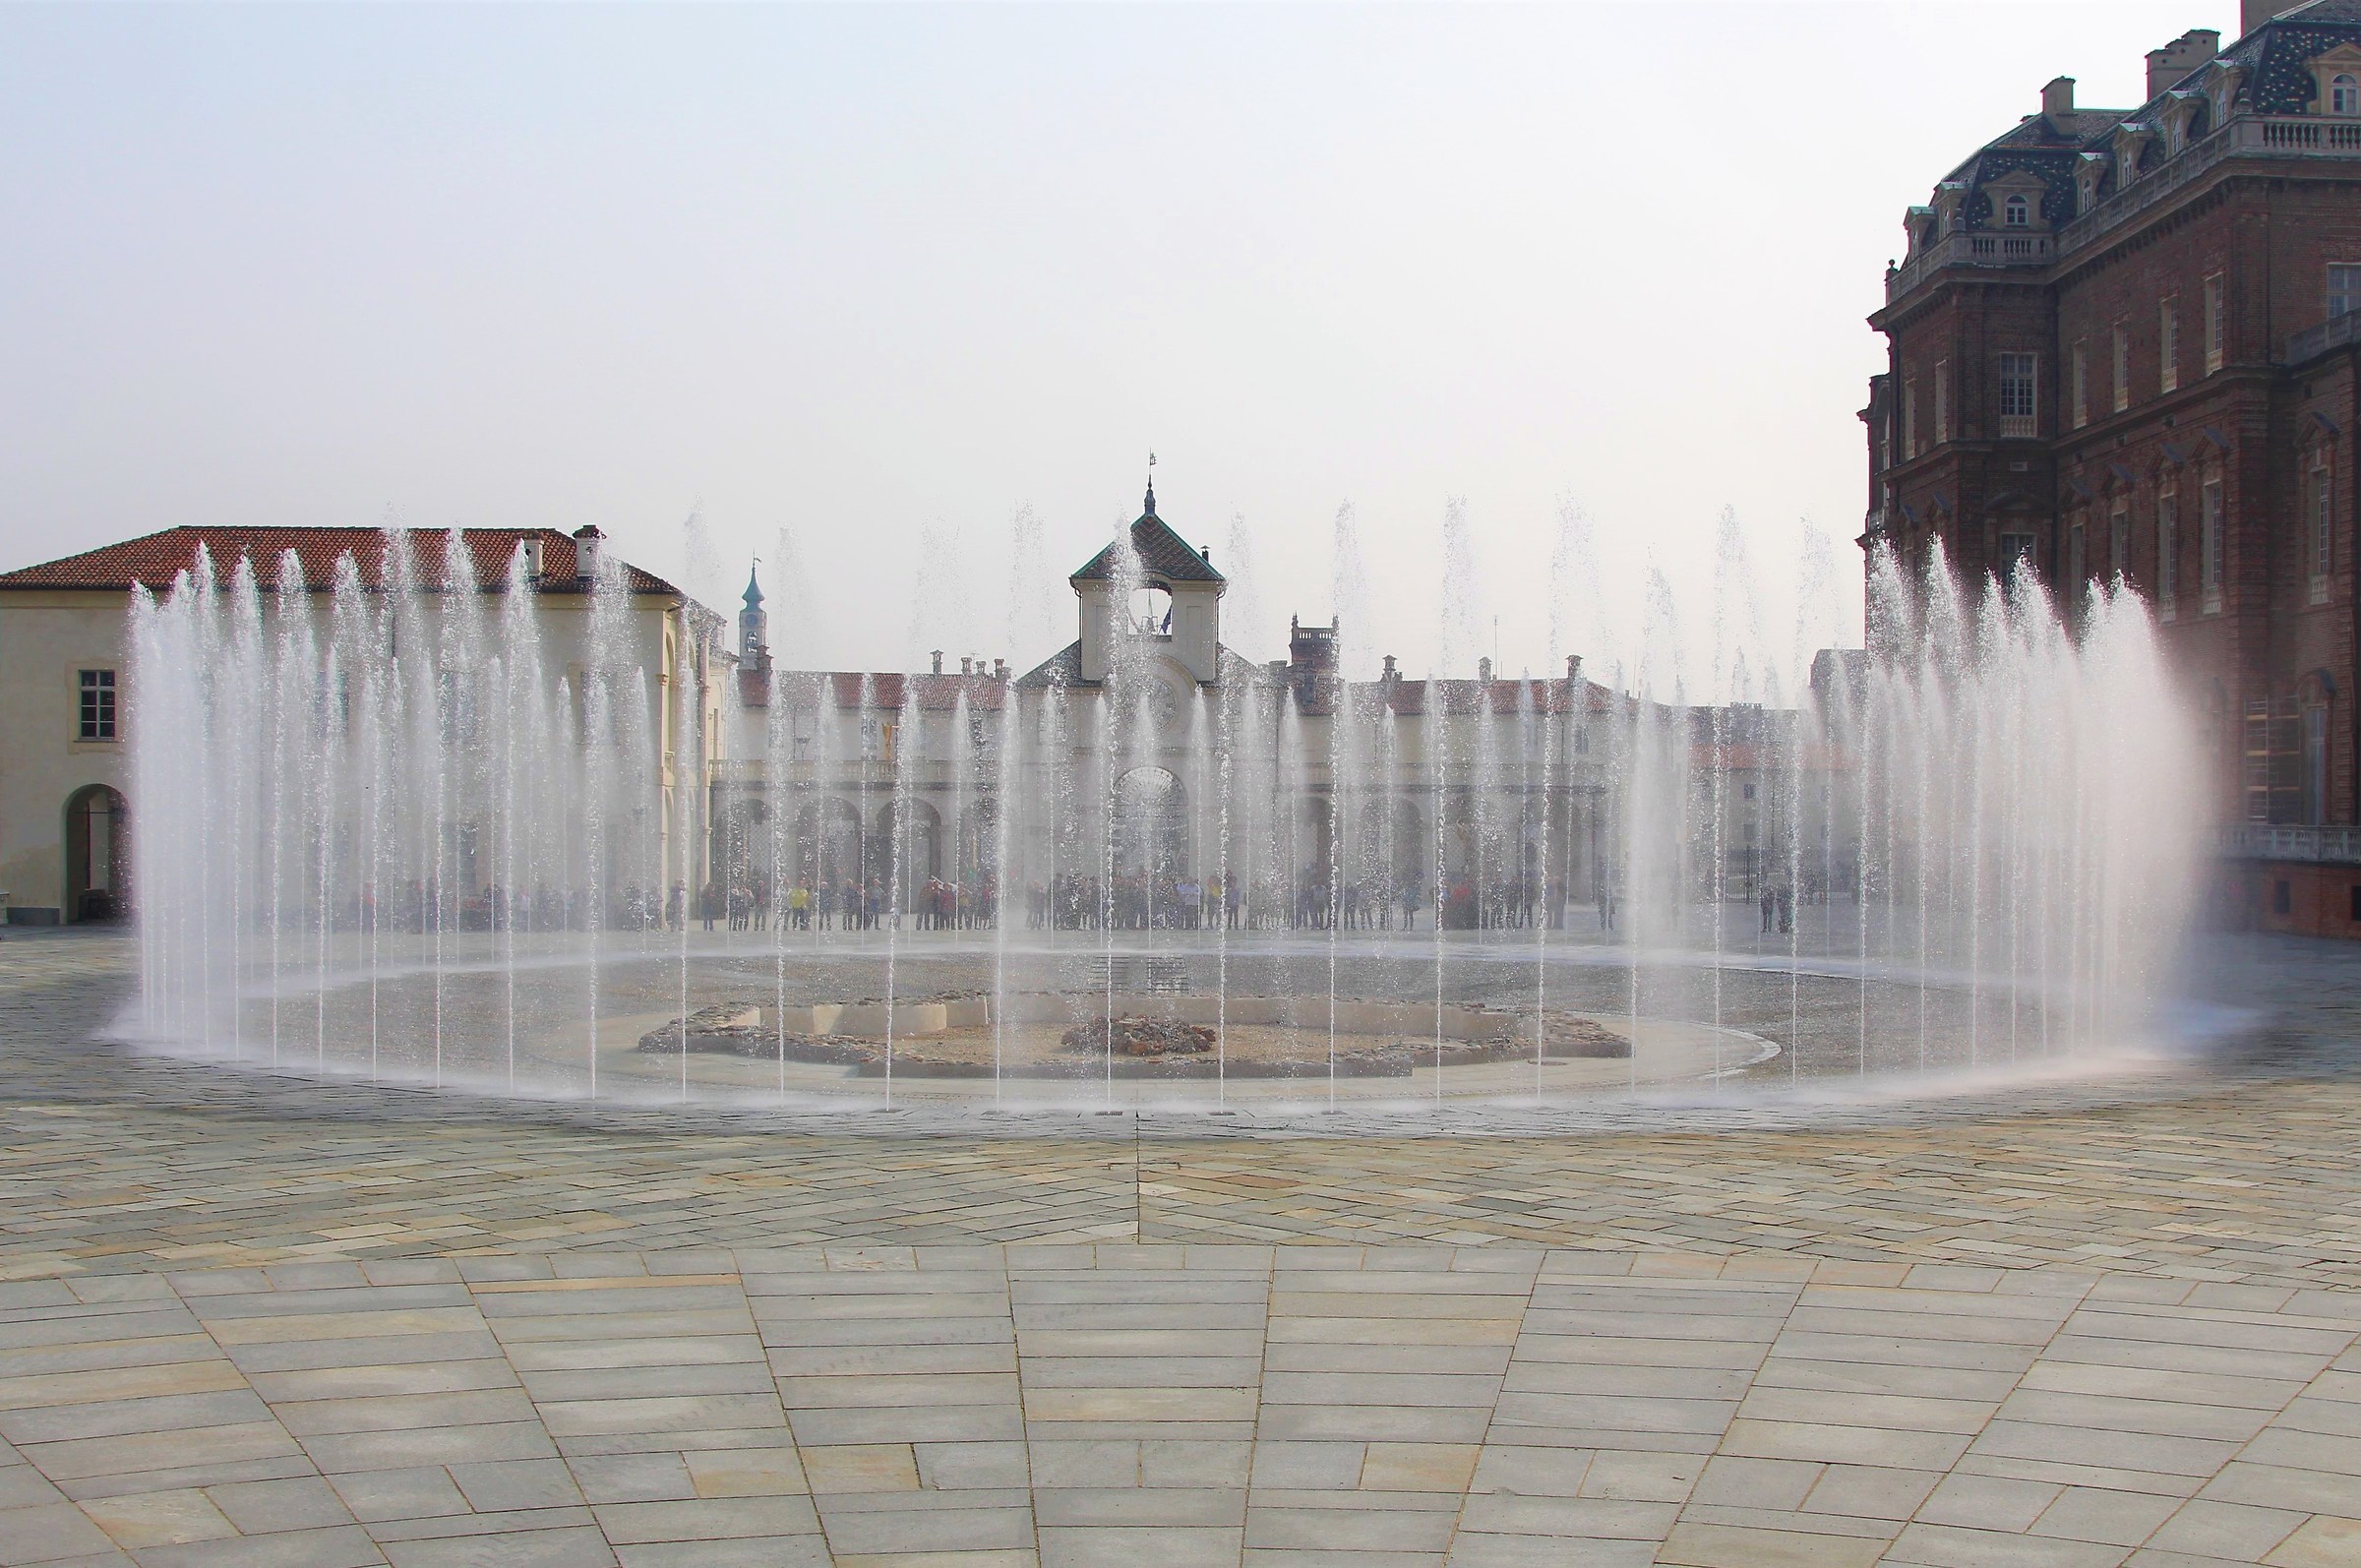 The dancing fountain in front of Venaria Palace...